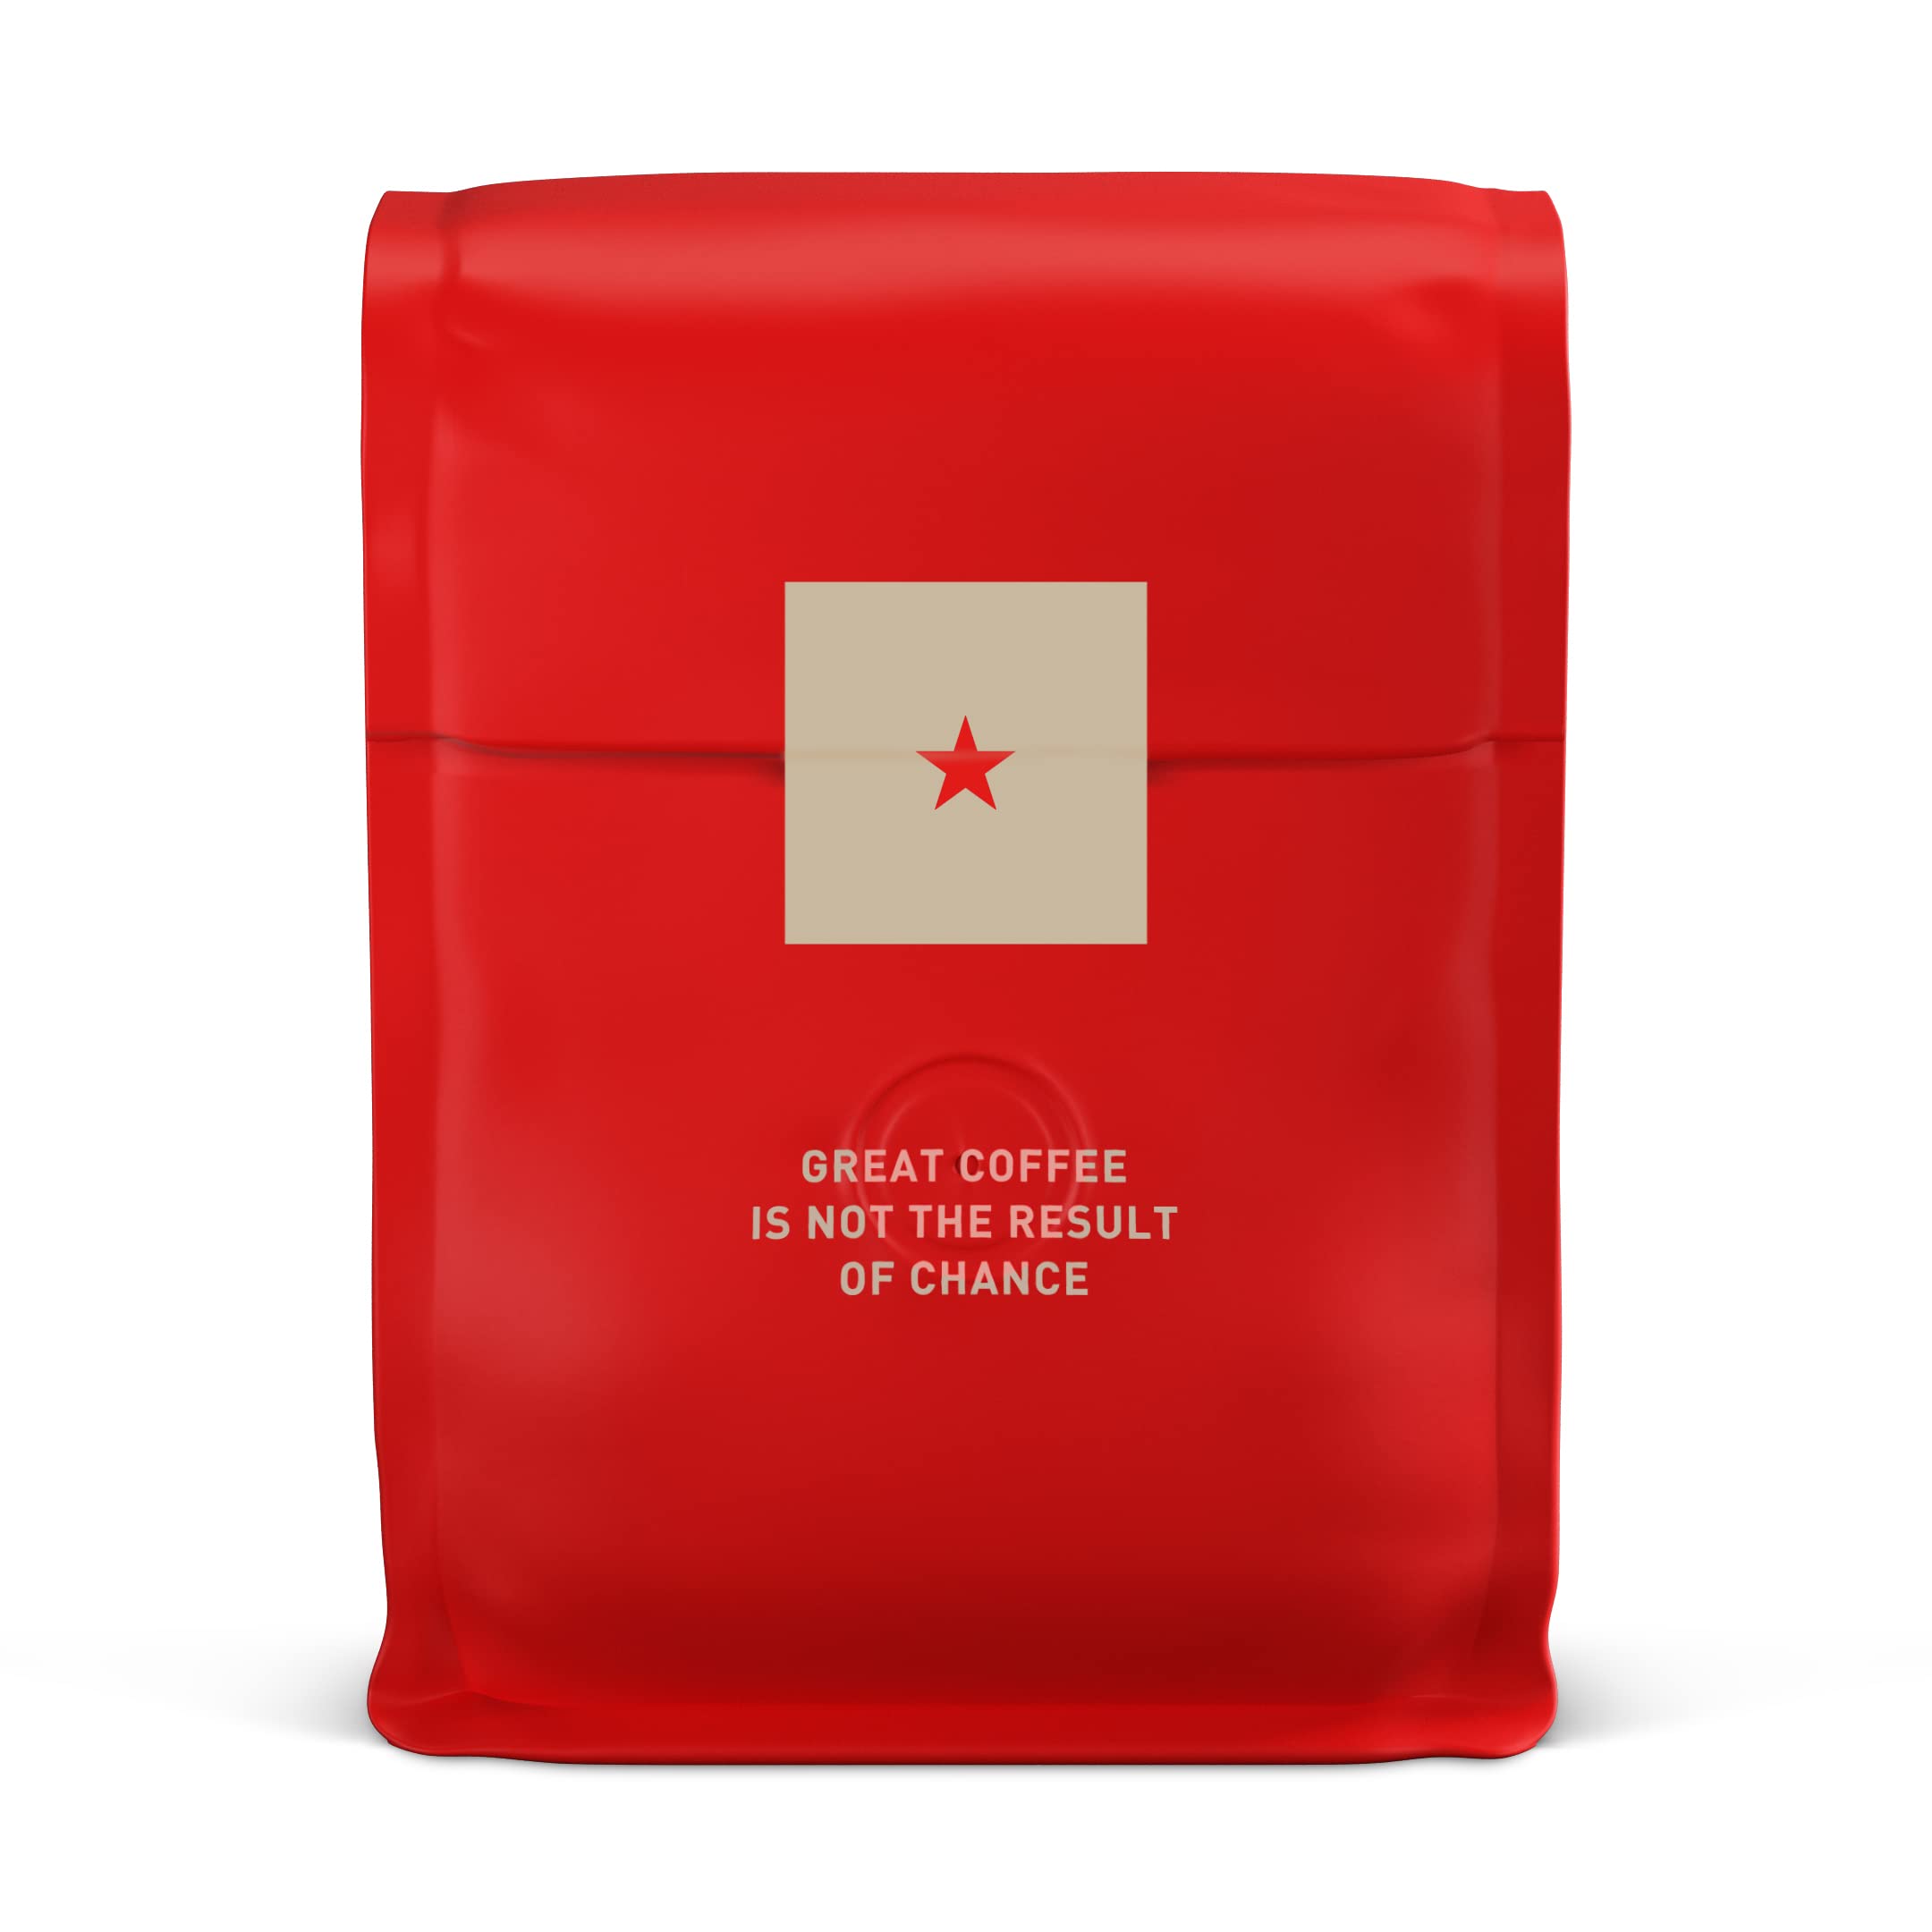 Intelligentsia Coffee, Medium Roast Whole Bean Coffee - El Diablo 12 Ounce Bag with Flavor Notes of Blackstrap Molasses, Cola and Cacao  $12.82  and as low as $10.90 with S&S